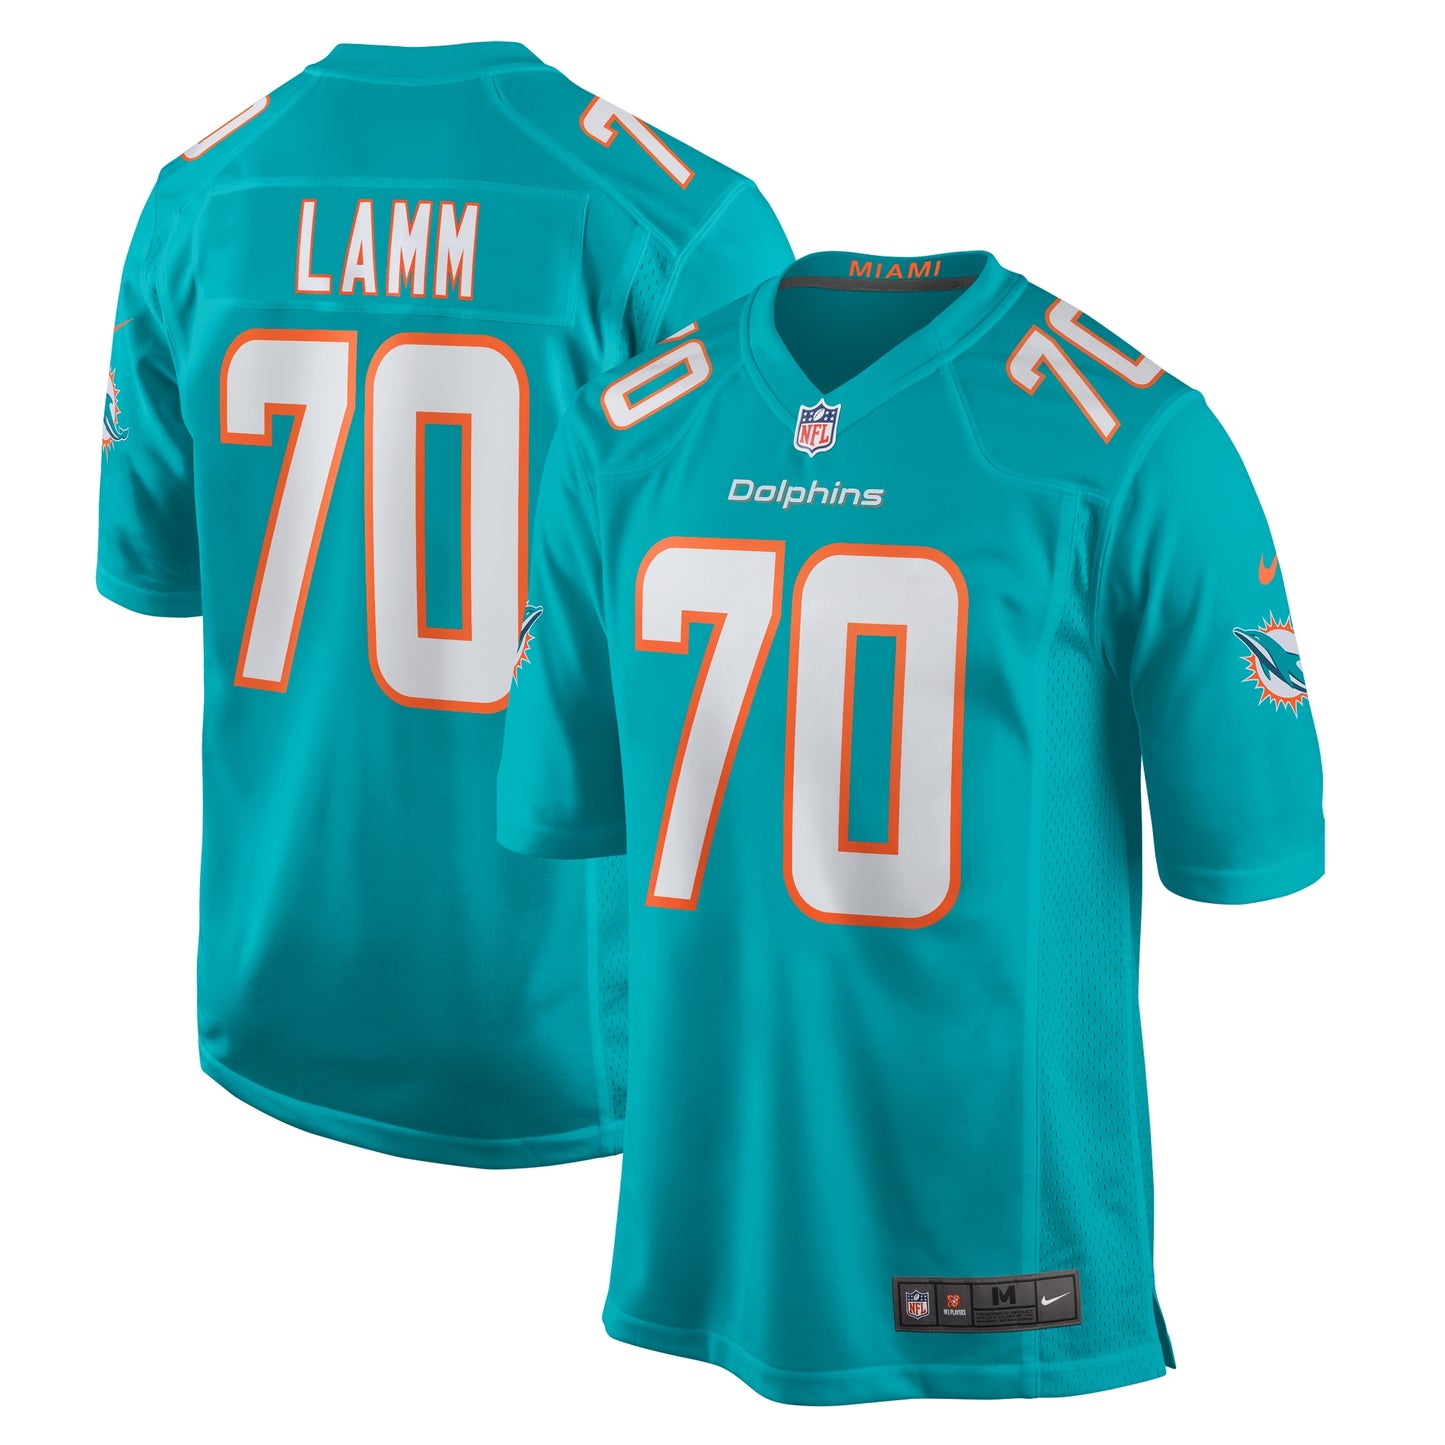 Kendall Lamm Miami Dolphins Nike Home Game Player Jersey - Aqua